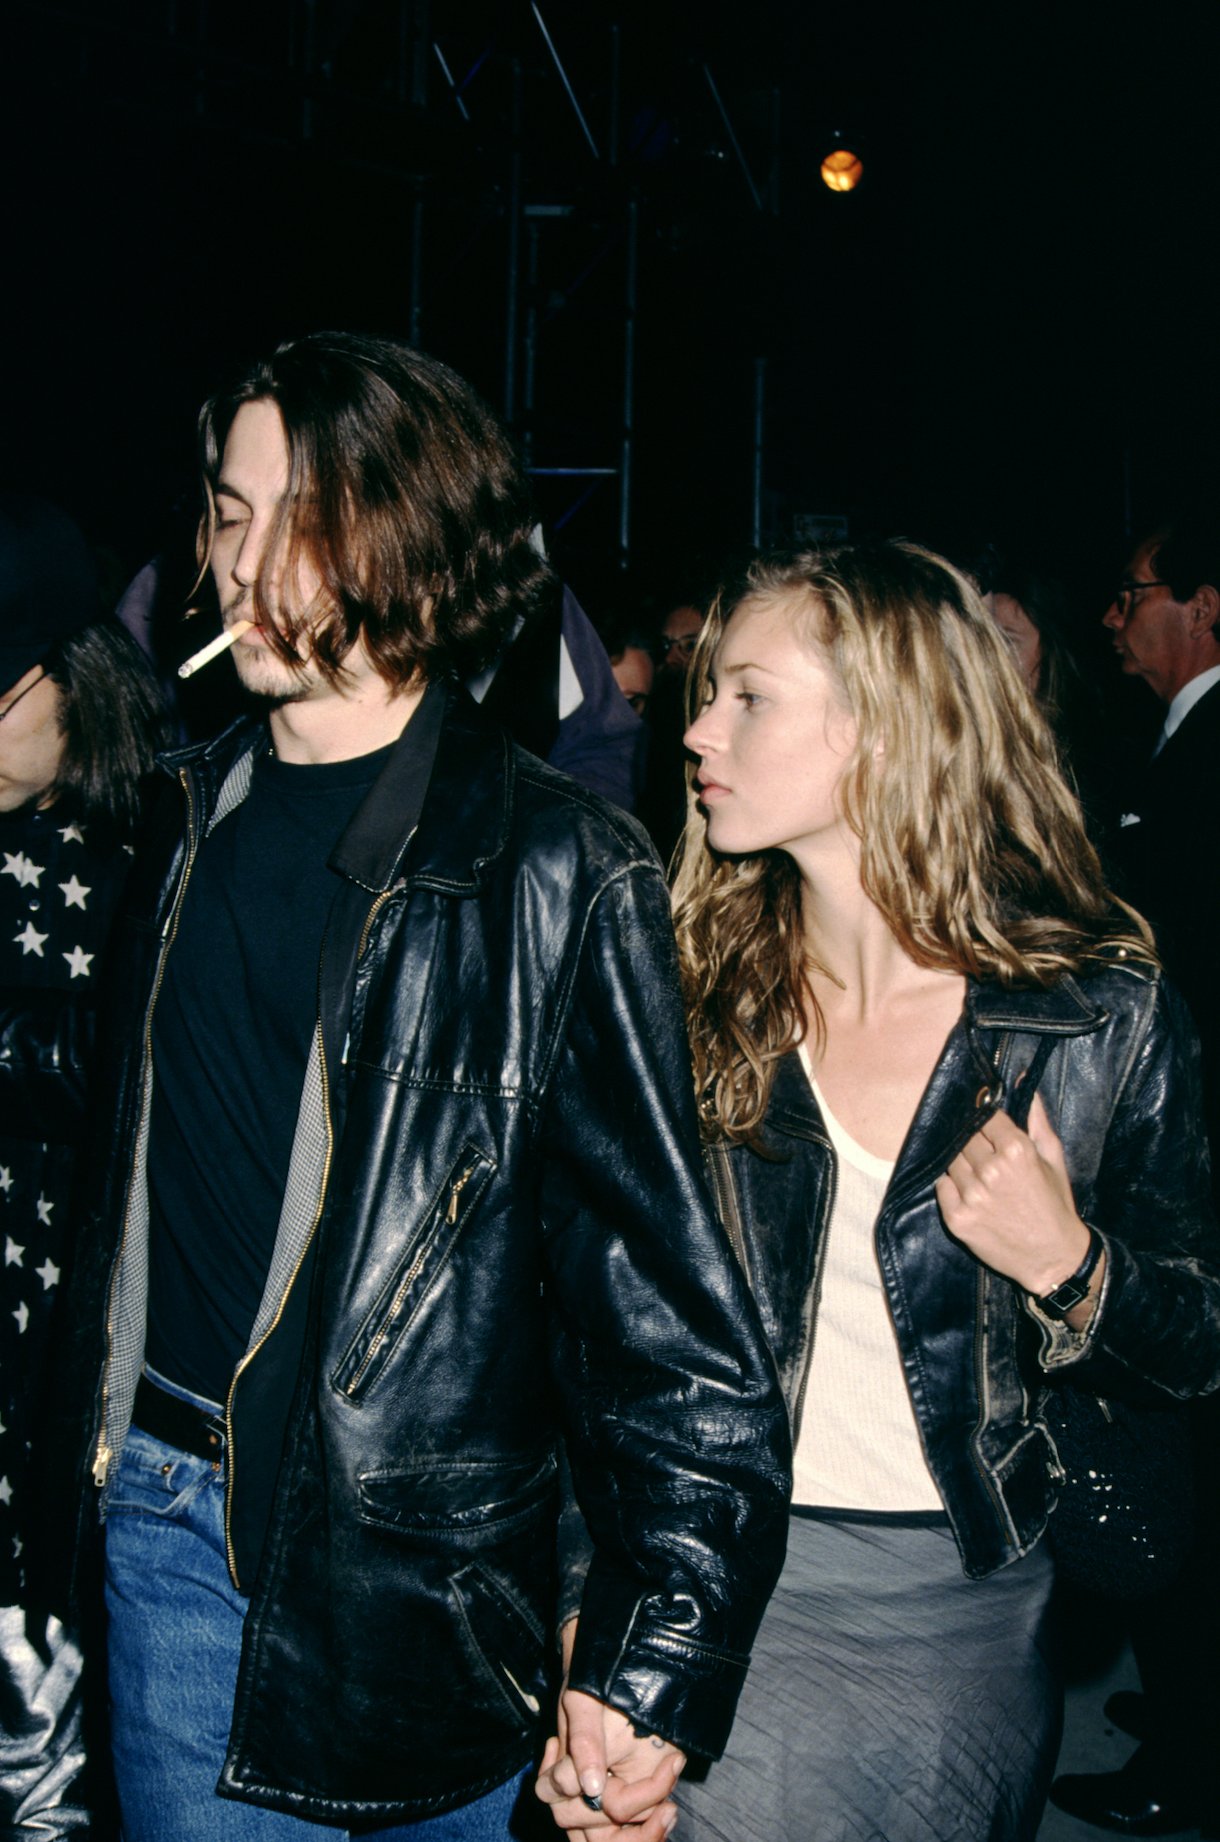 Actor Johnny Depp and model Kate Moss in 1994 at Smashbox Studios in Culver City, California